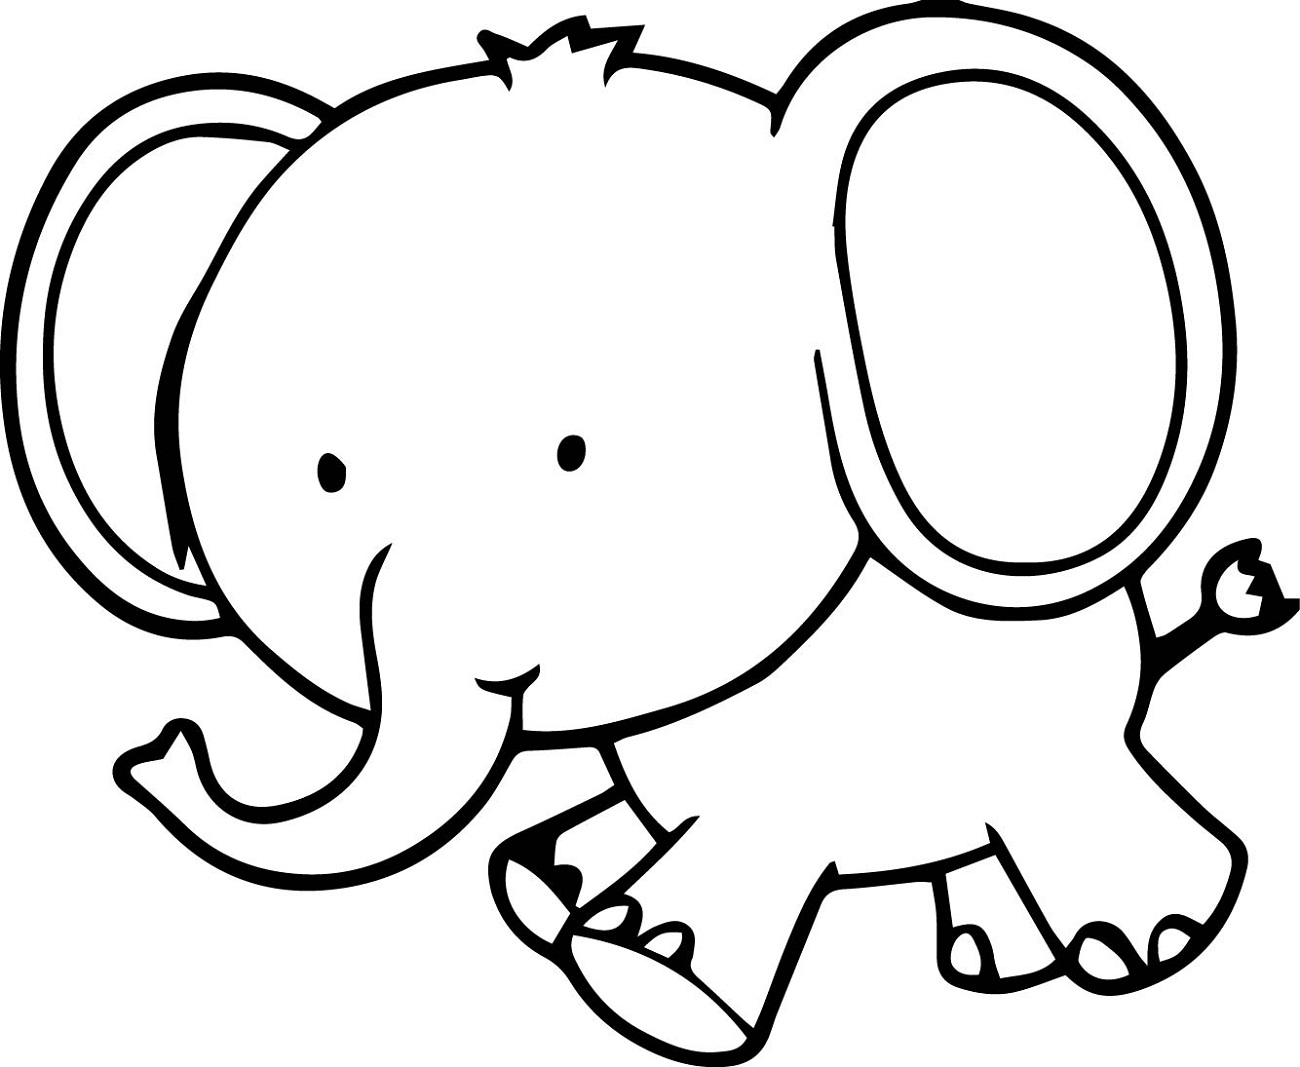 Baby Elephant Coloring Pages for Kindergarten | Activity ...